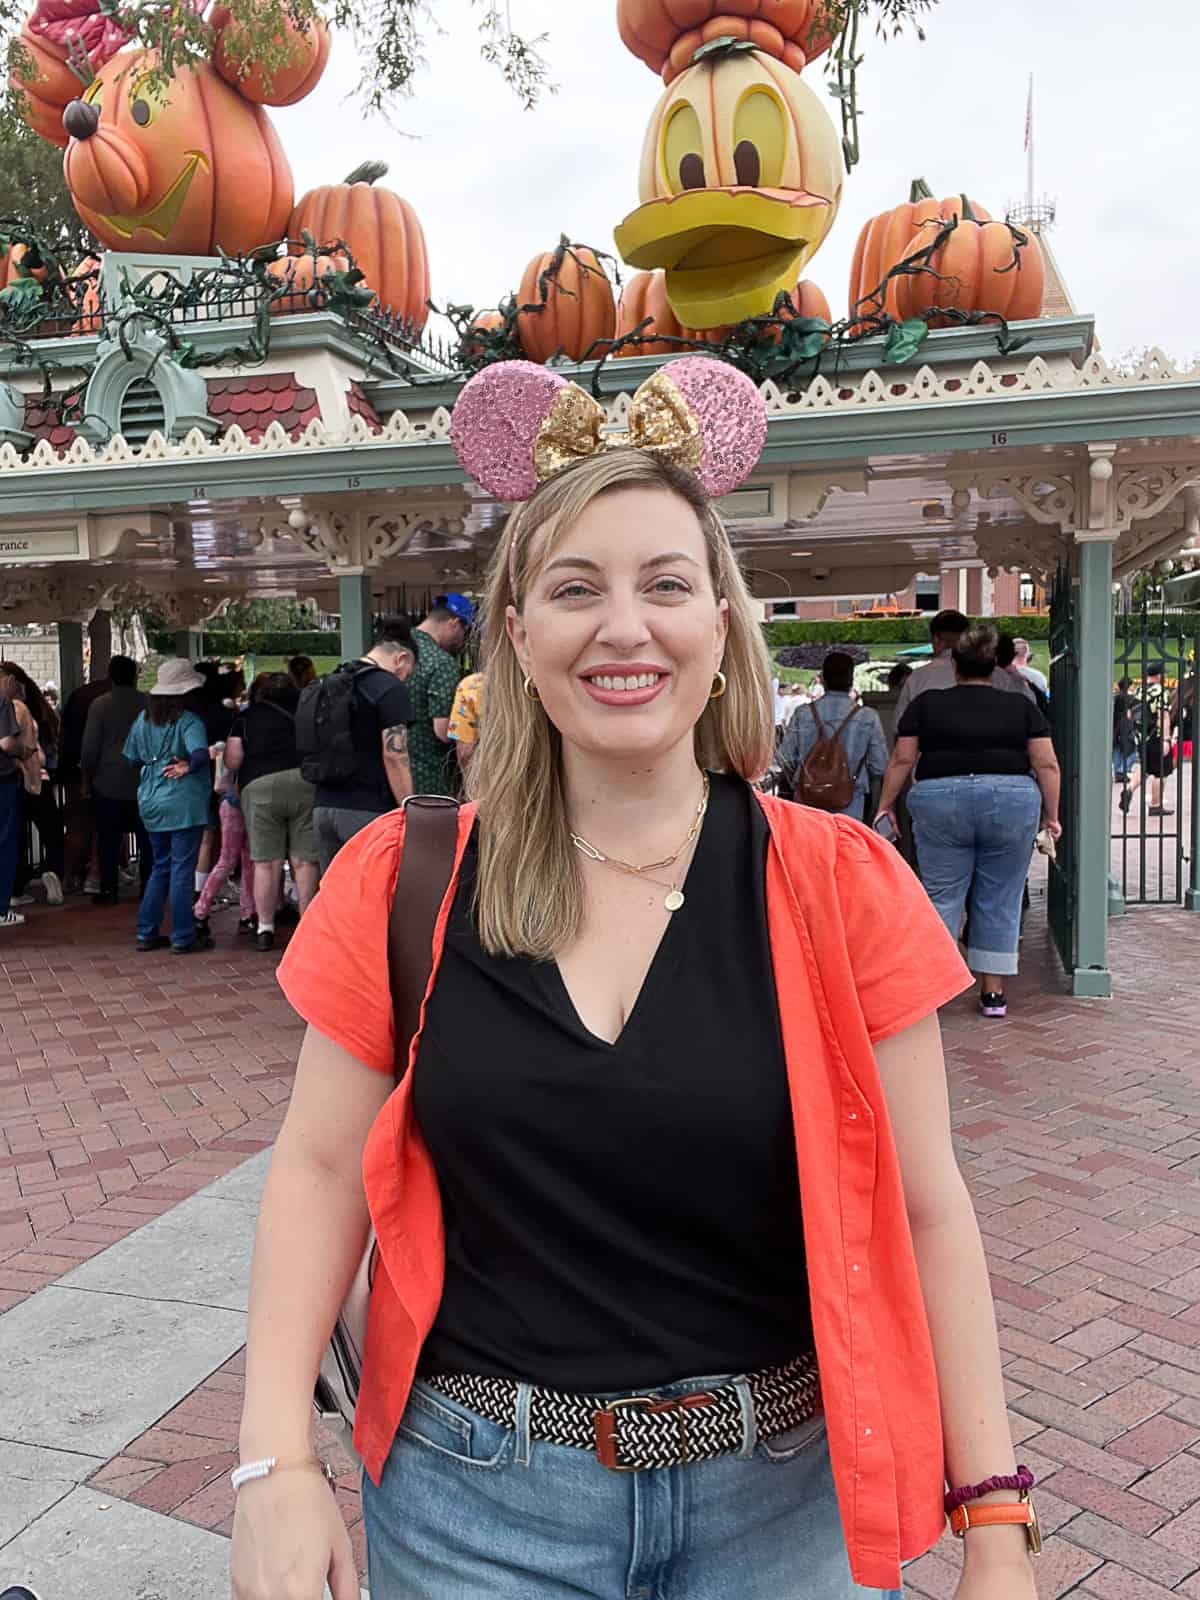 Jenna Passaro demonstrating Disney outfit for women around Halloween Time in the parks